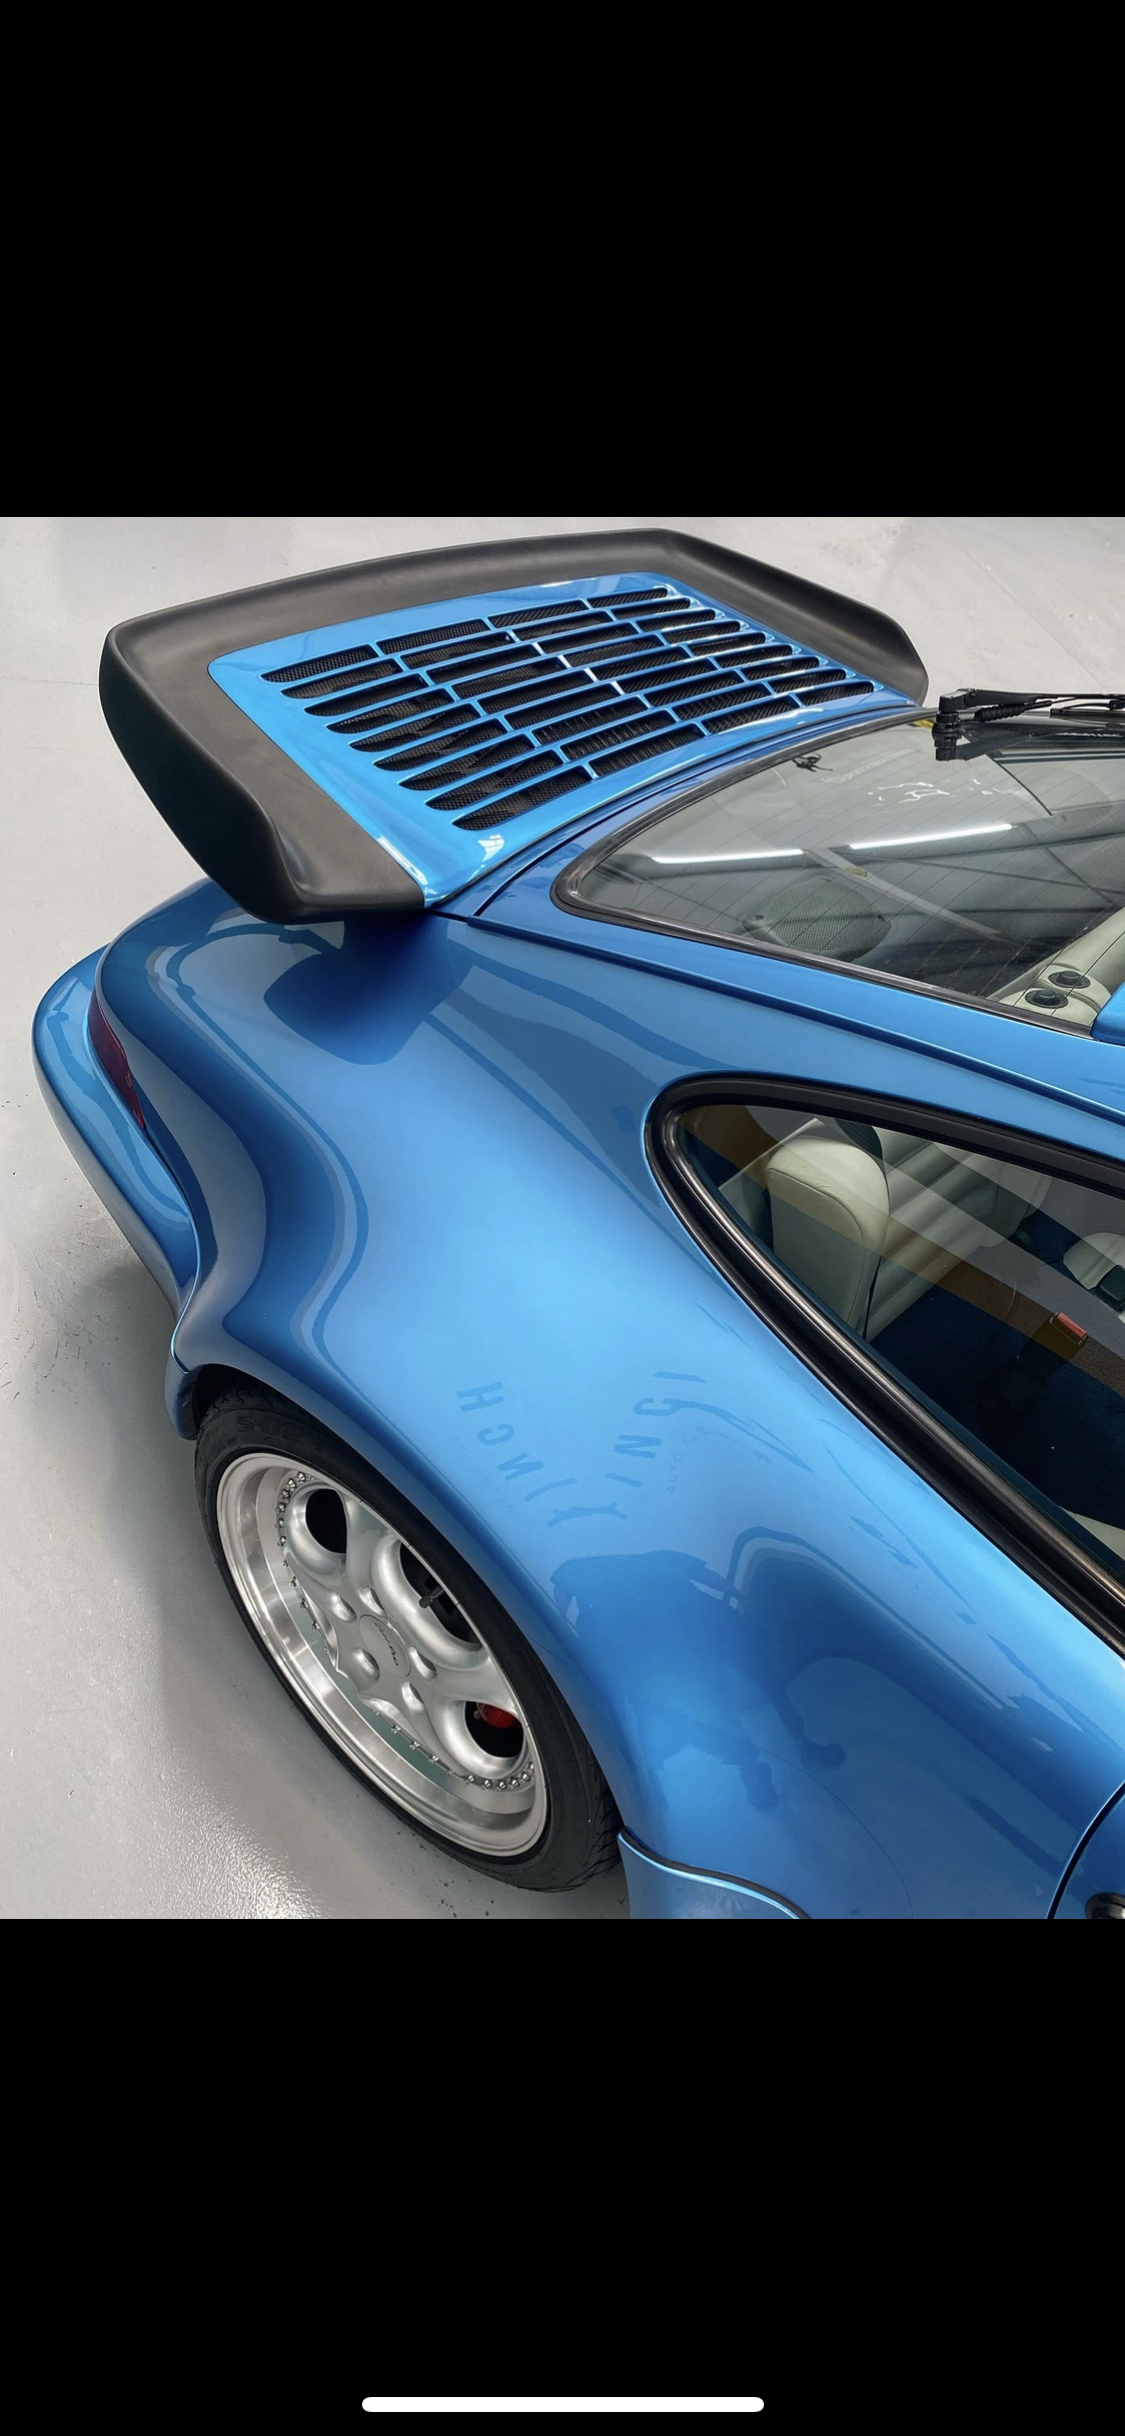 Blue sports car with rear spoiler and solar panel integration.